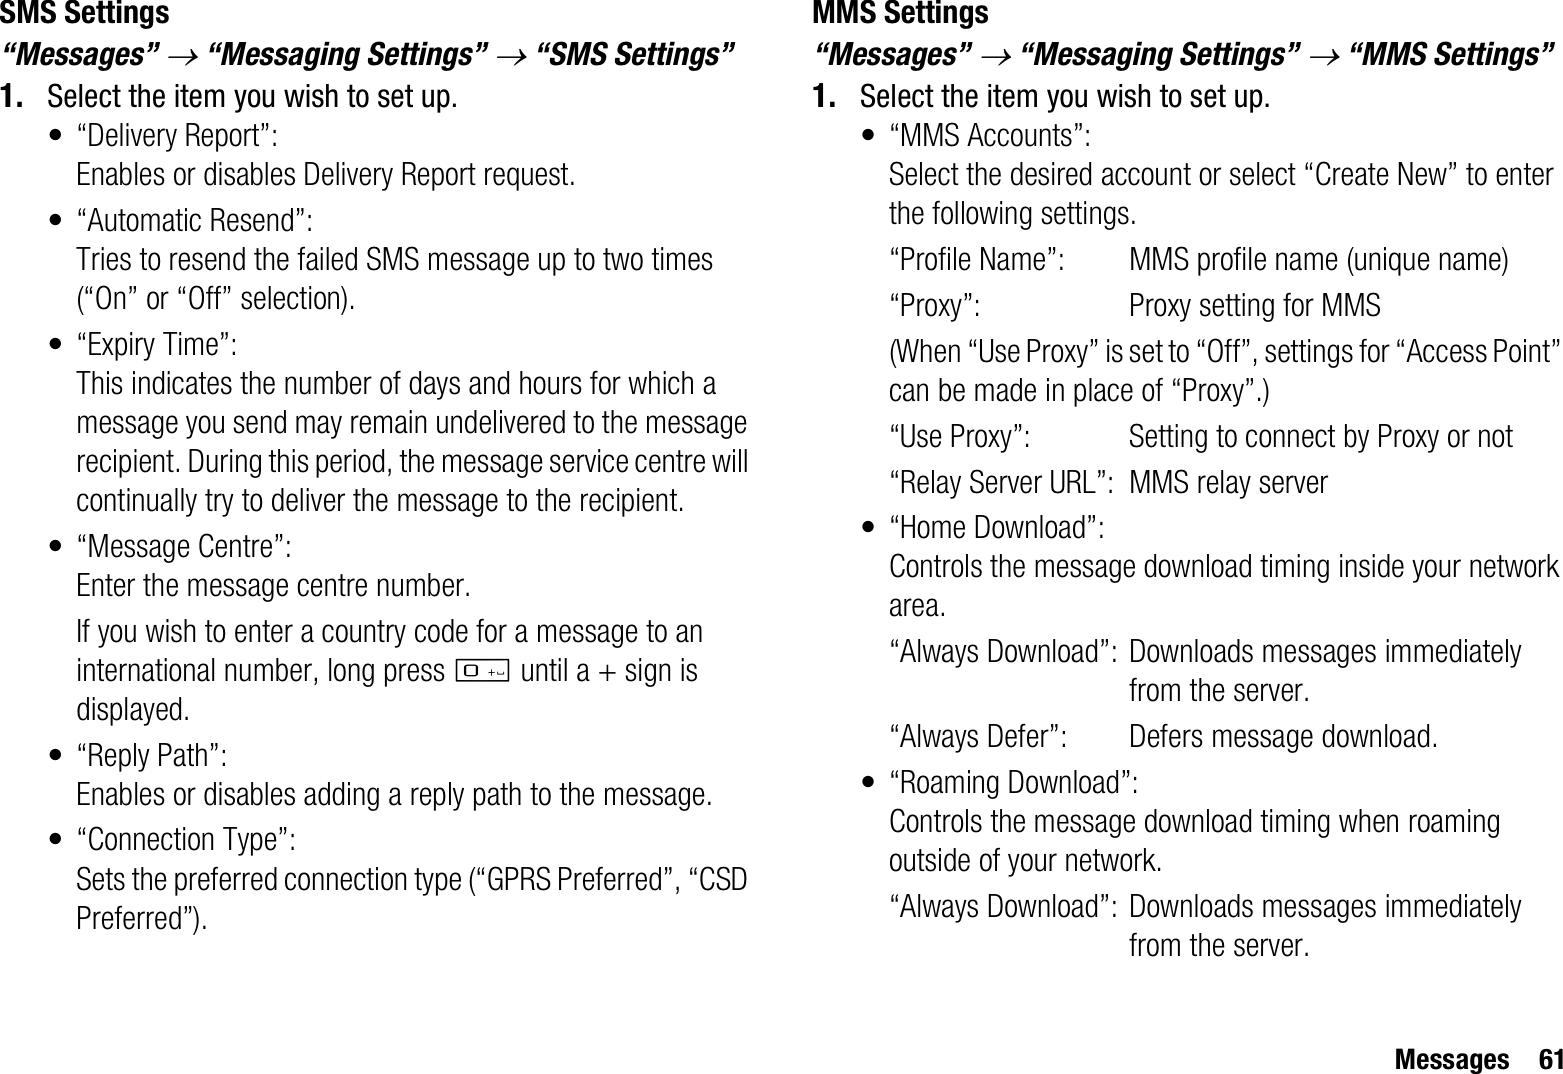 Messages 61SMS Settings“Messages” o “Messaging Settings” o “SMS Settings”1. Select the item you wish to set up.• “Delivery Report”:Enables or disables Delivery Report request.• “Automatic Resend”: Tries to resend the failed SMS message up to two times (“On” or “Off” selection).• “Expiry Time”: This indicates the number of days and hours for which a message you send may remain undelivered to the message recipient. During this period, the message service centre will continually try to deliver the message to the recipient.• “Message Centre”:Enter the message centre number.If you wish to enter a country code for a message to an international number, long press Q until a + sign is displayed.•“Reply Path”:Enables or disables adding a reply path to the message.• “Connection Type”:Sets the preferred connection type (“GPRS Preferred”, “CSD Preferred”).MMS Settings“Messages” o “Messaging Settings” o “MMS Settings”1. Select the item you wish to set up.• “MMS Accounts”:Select the desired account or select “Create New” to enter the following settings.“Profile Name”: MMS profile name (unique name)“Proxy”: Proxy setting for MMS(When “Use Proxy” is set to “Off”, settings for “Access Point” can be made in place of “Proxy”.)“Use Proxy”: Setting to connect by Proxy or not“Relay Server URL”: MMS relay server•“Home Download”:Controls the message download timing inside your network area.“Always Download”: Downloads messages immediately from the server.“Always Defer”:  Defers message download.• “Roaming Download”:Controls the message download timing when roaming outside of your network.“Always Download”: Downloads messages immediately from the server.